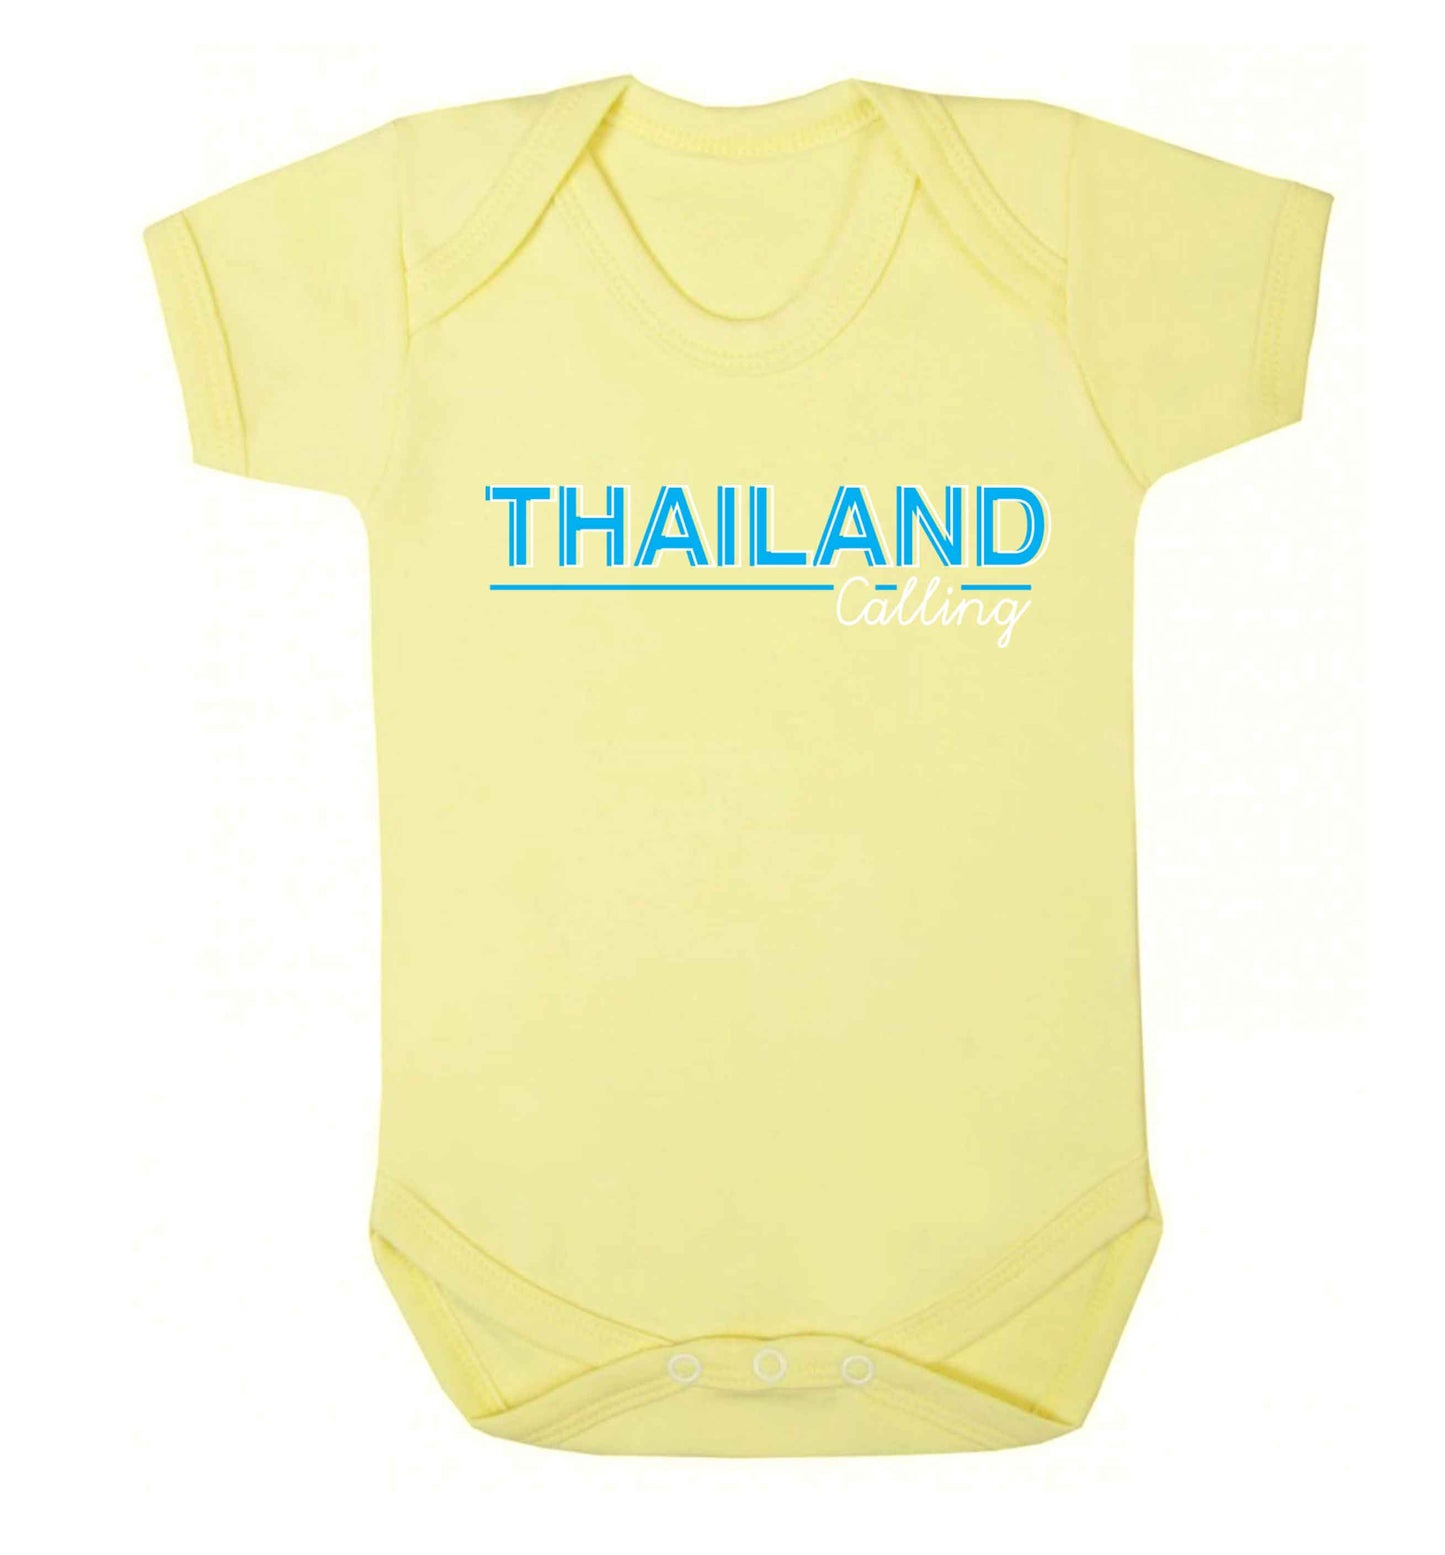 Thailand calling Baby Vest pale yellow 18-24 months